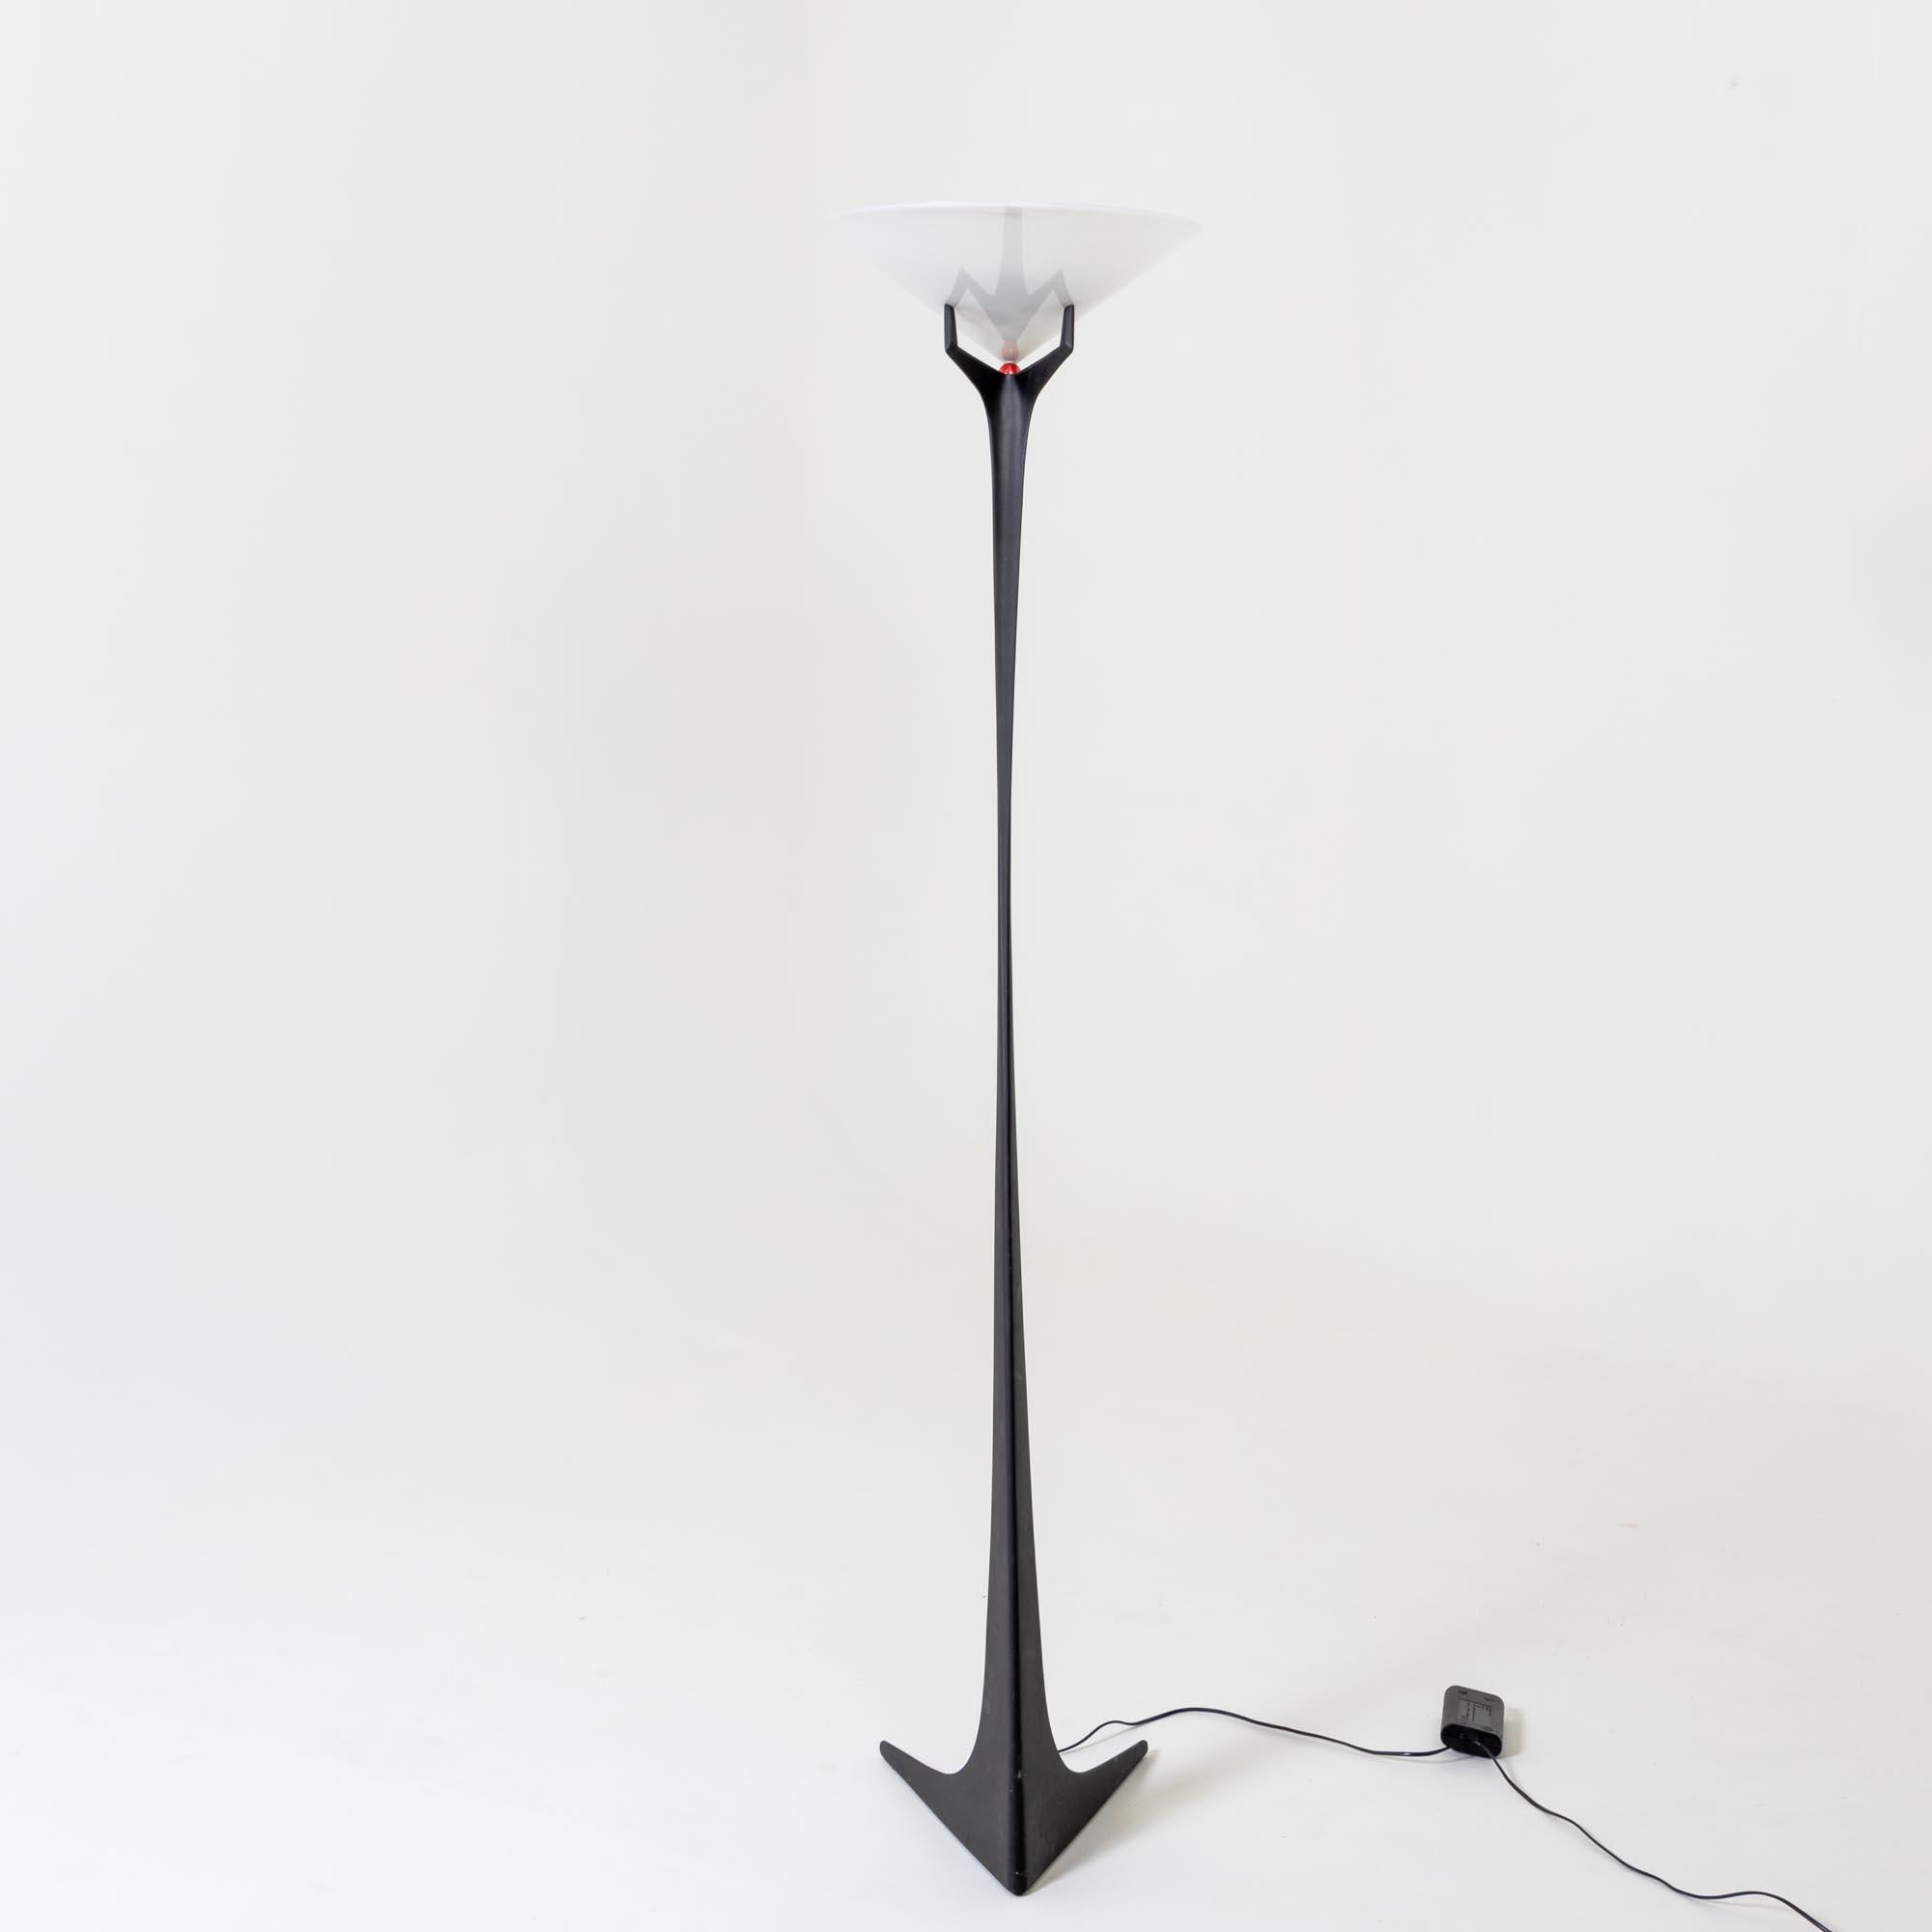 Montjuïc floor lamp with black base and white acrylic lampshade. A small red ball connects the two contrasting elements. The floor lamp was designed by Santiago Calatrava for Artemide in the 1990s. The Spanish architect and designer is known for his